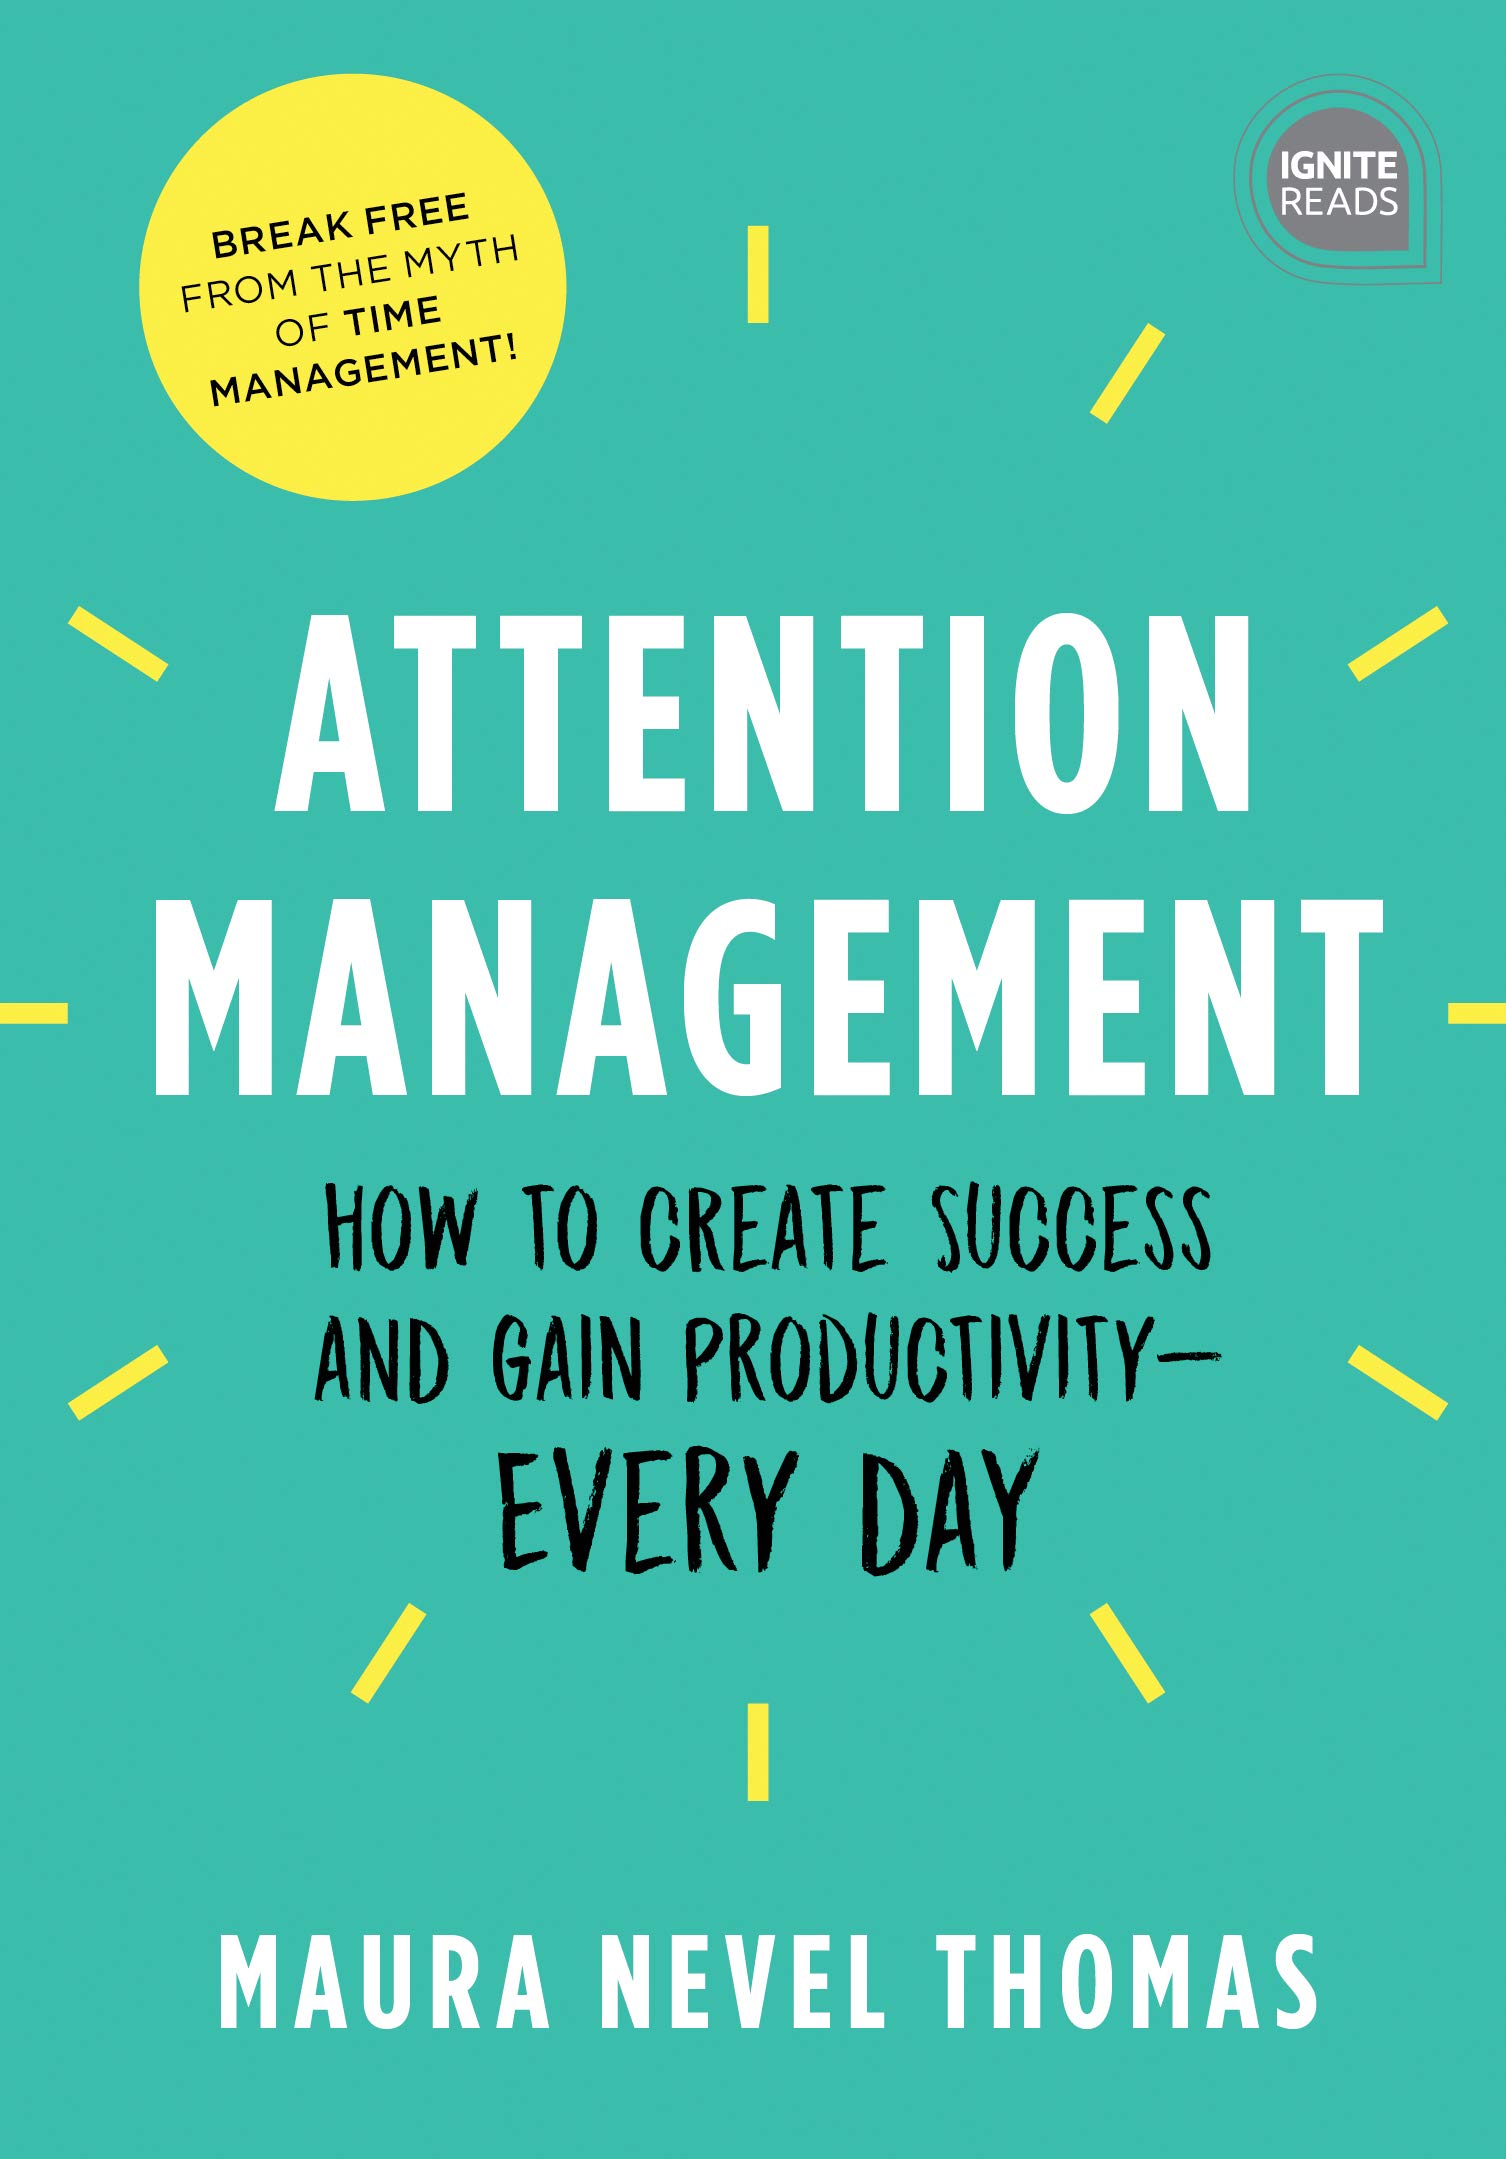 Attention Management: How to Create Success and Gain Productivity - Every Day (Ignite Reads)